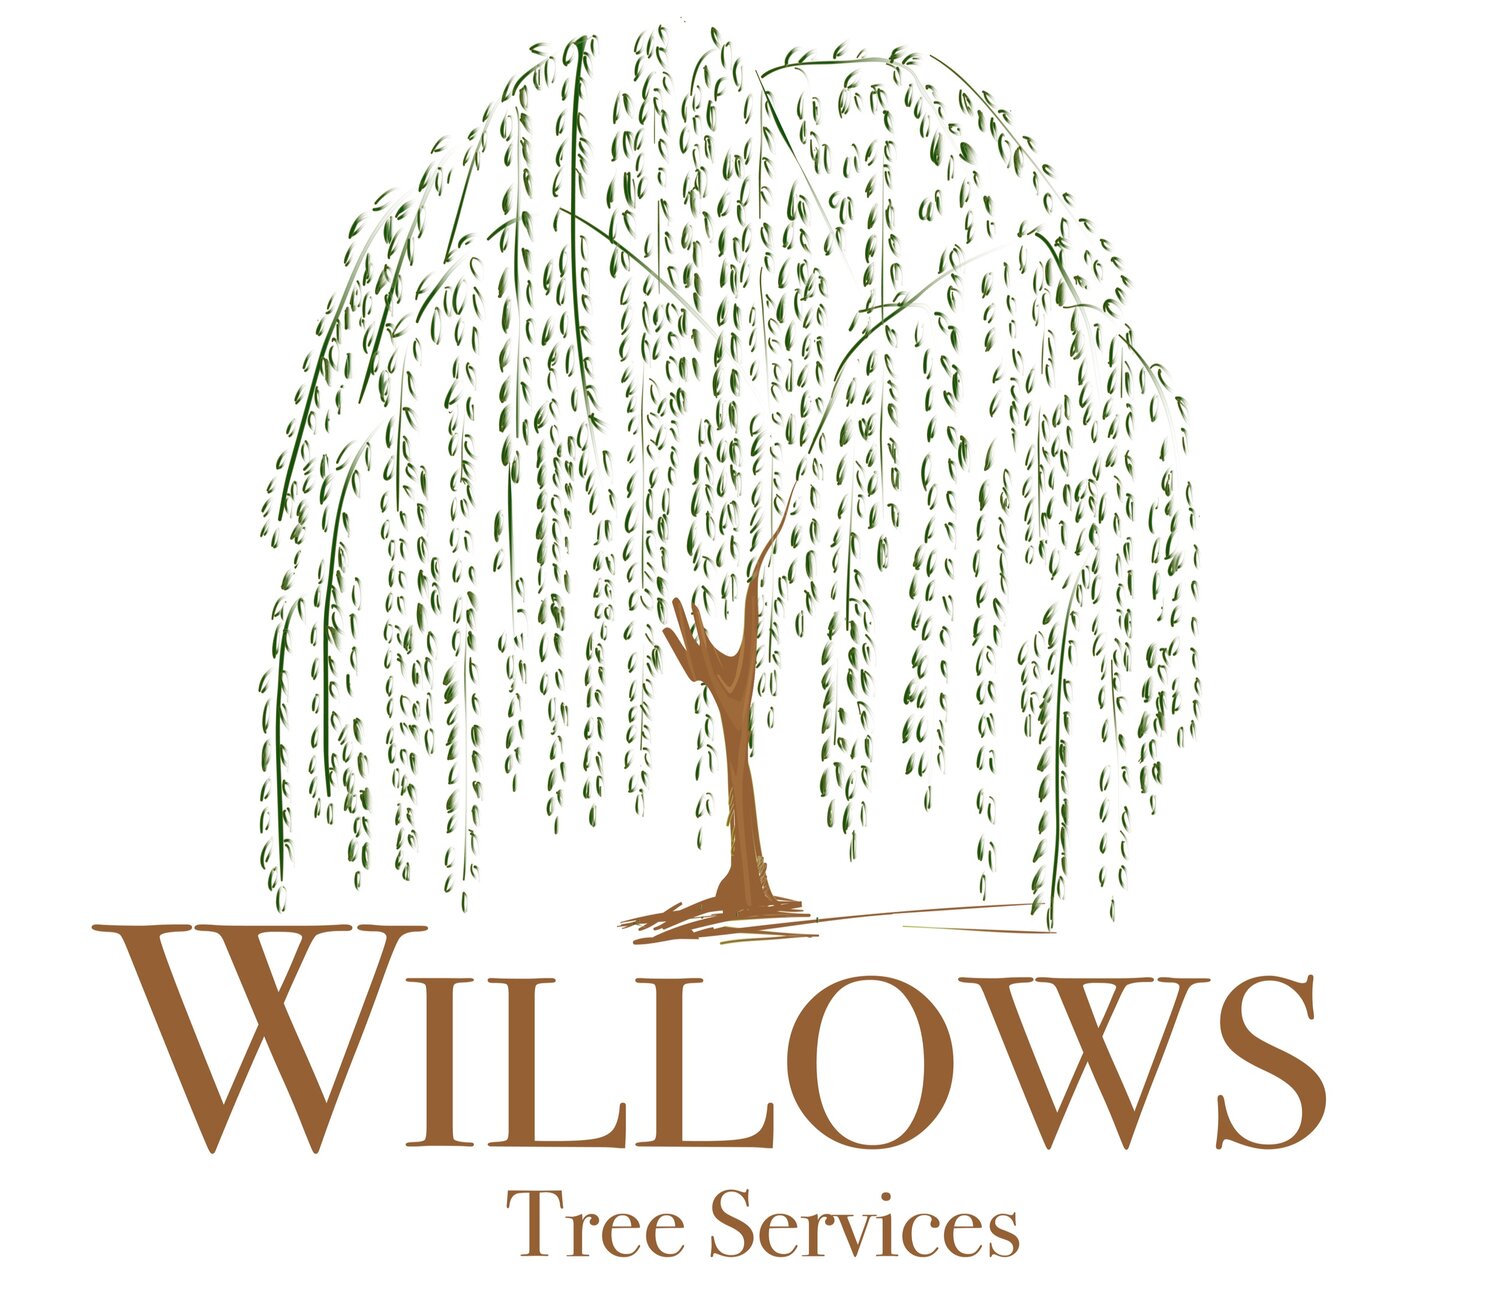 Willows Tree Services